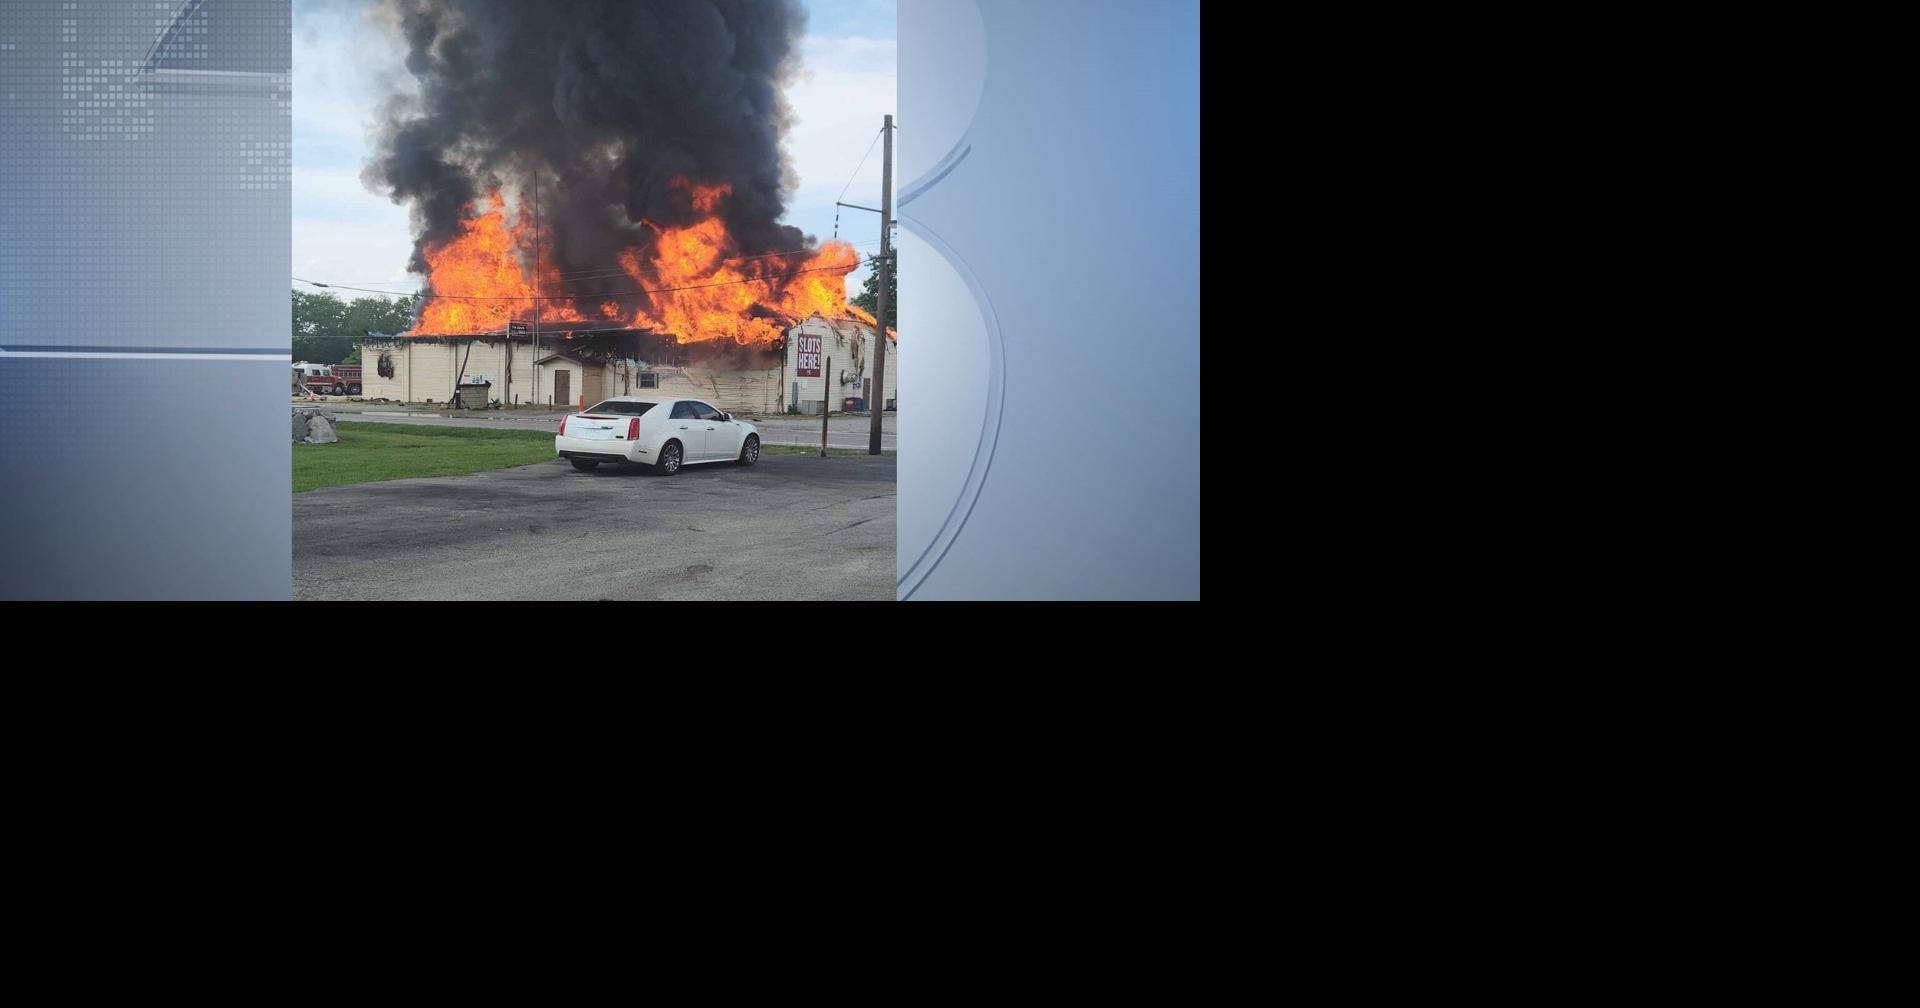 Fire breaks out at Hey Carl’s Bar in Franklin County